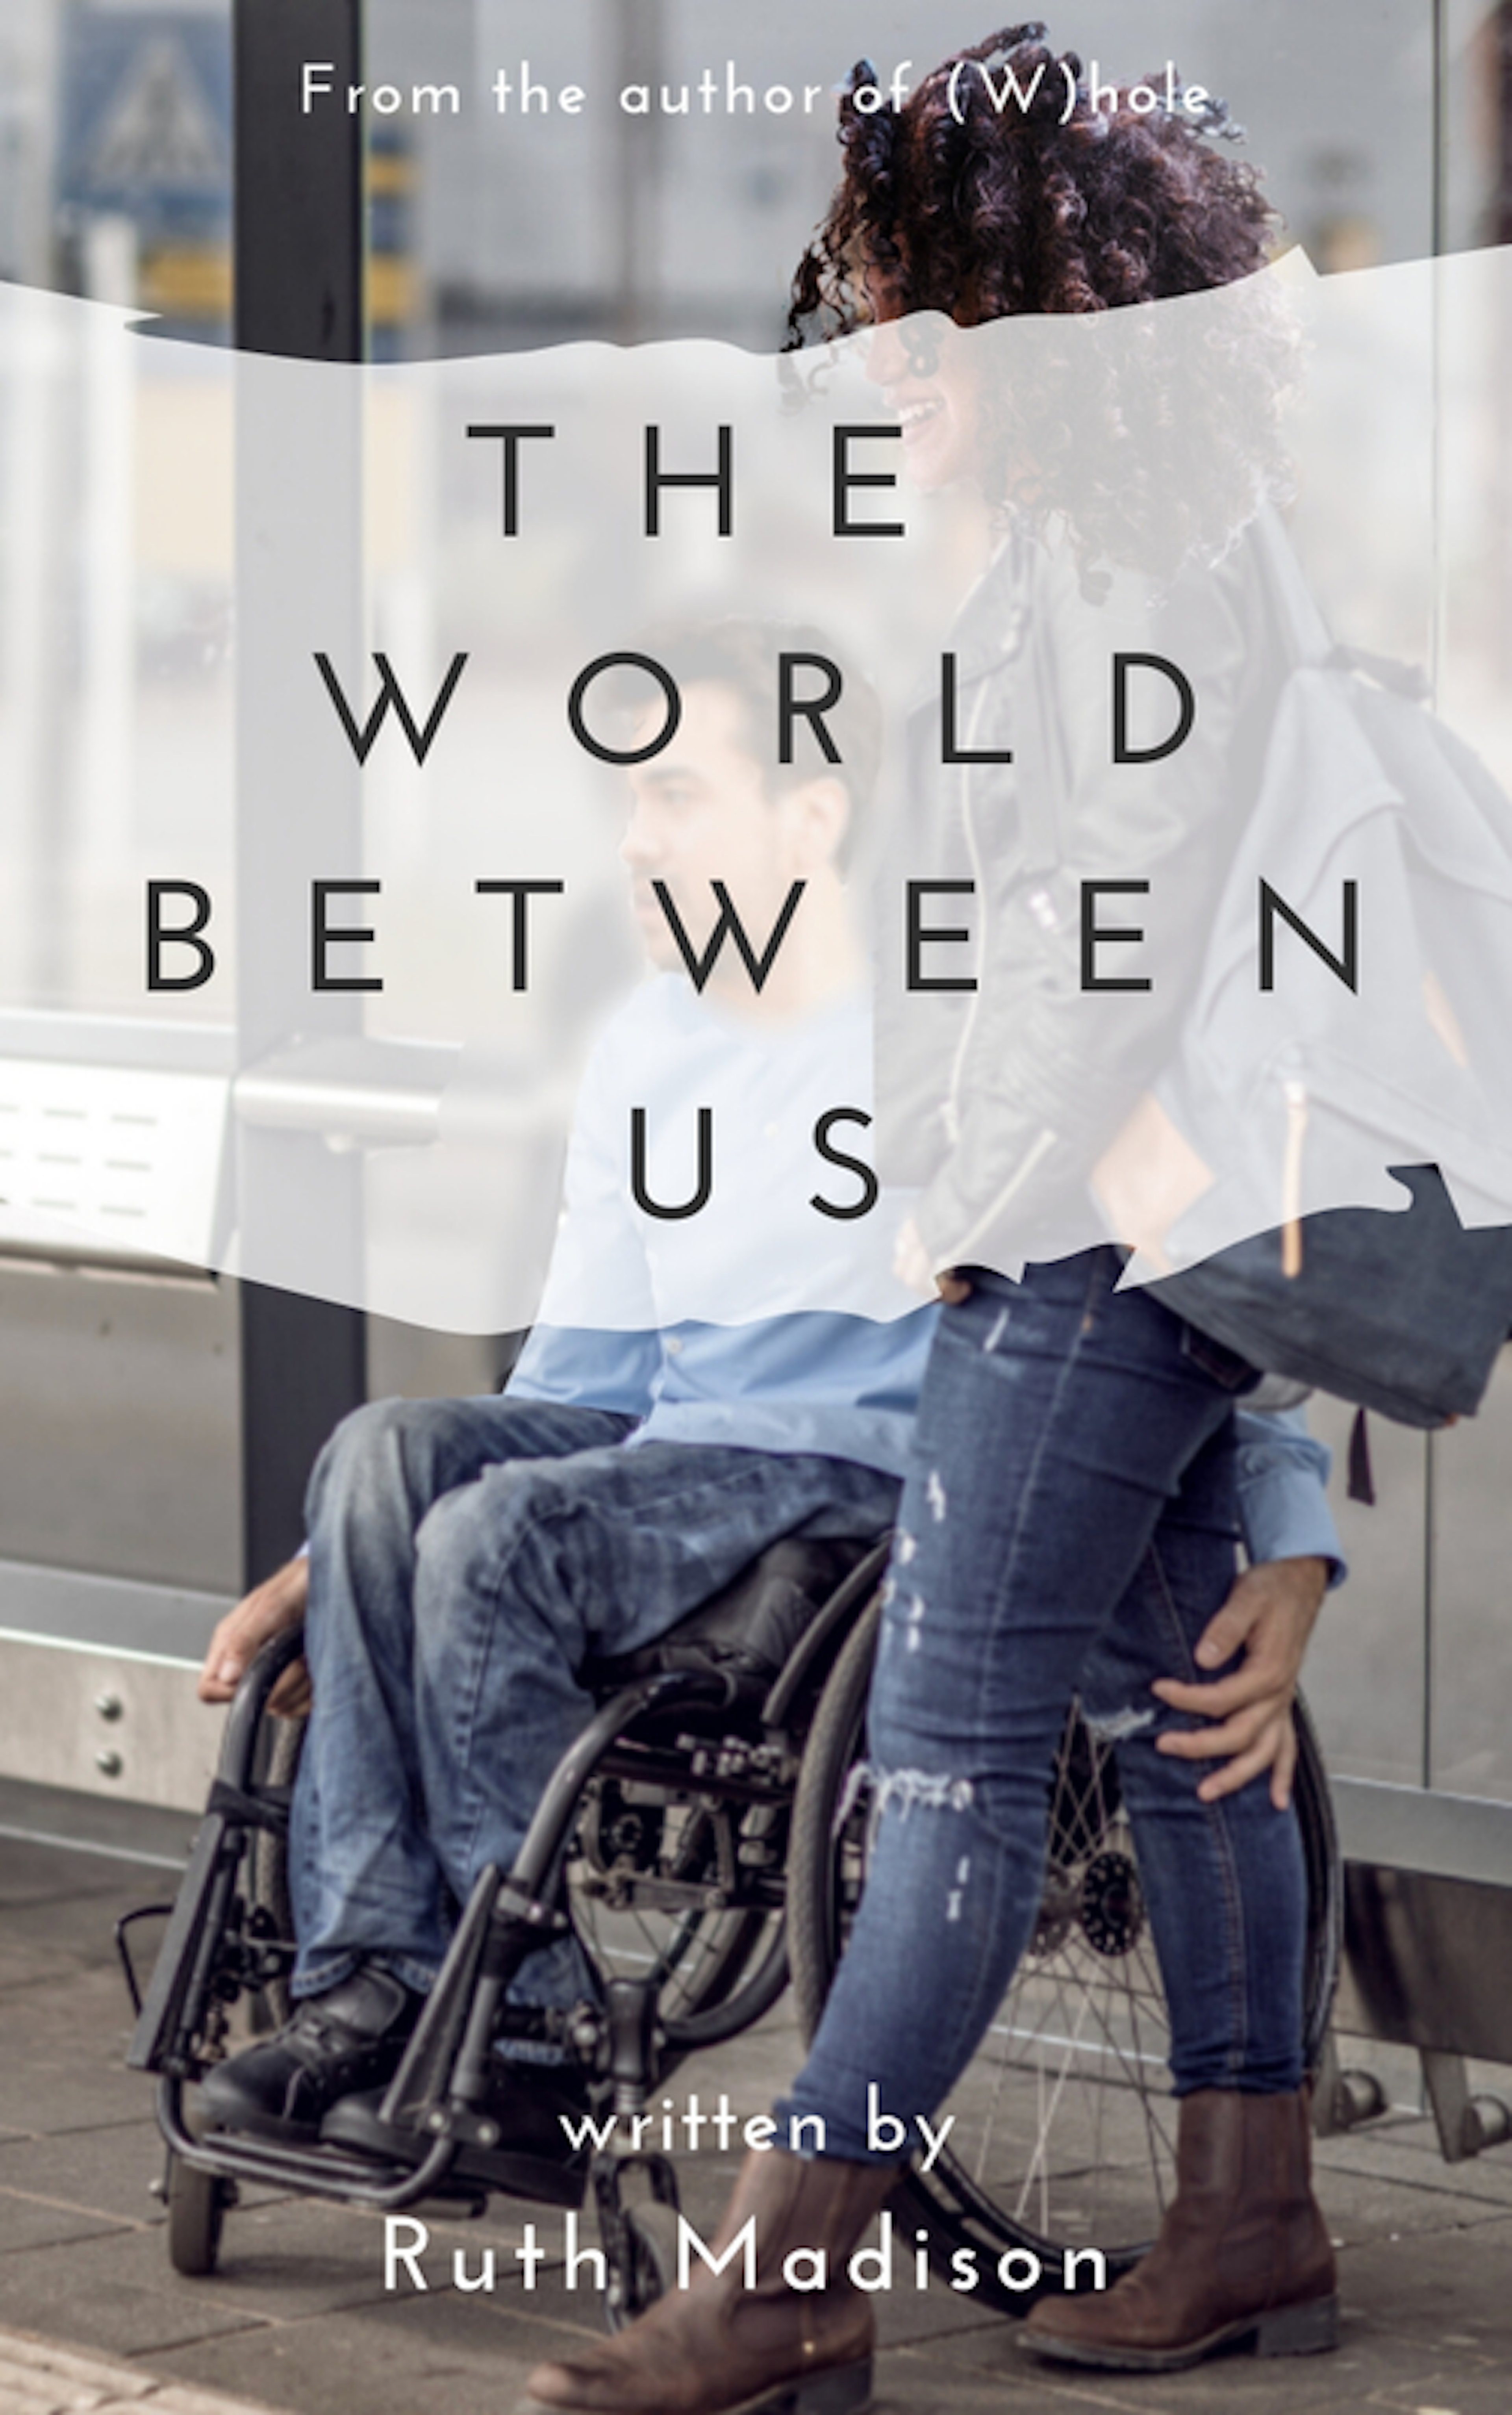 The World Between Us by Ruth Madison